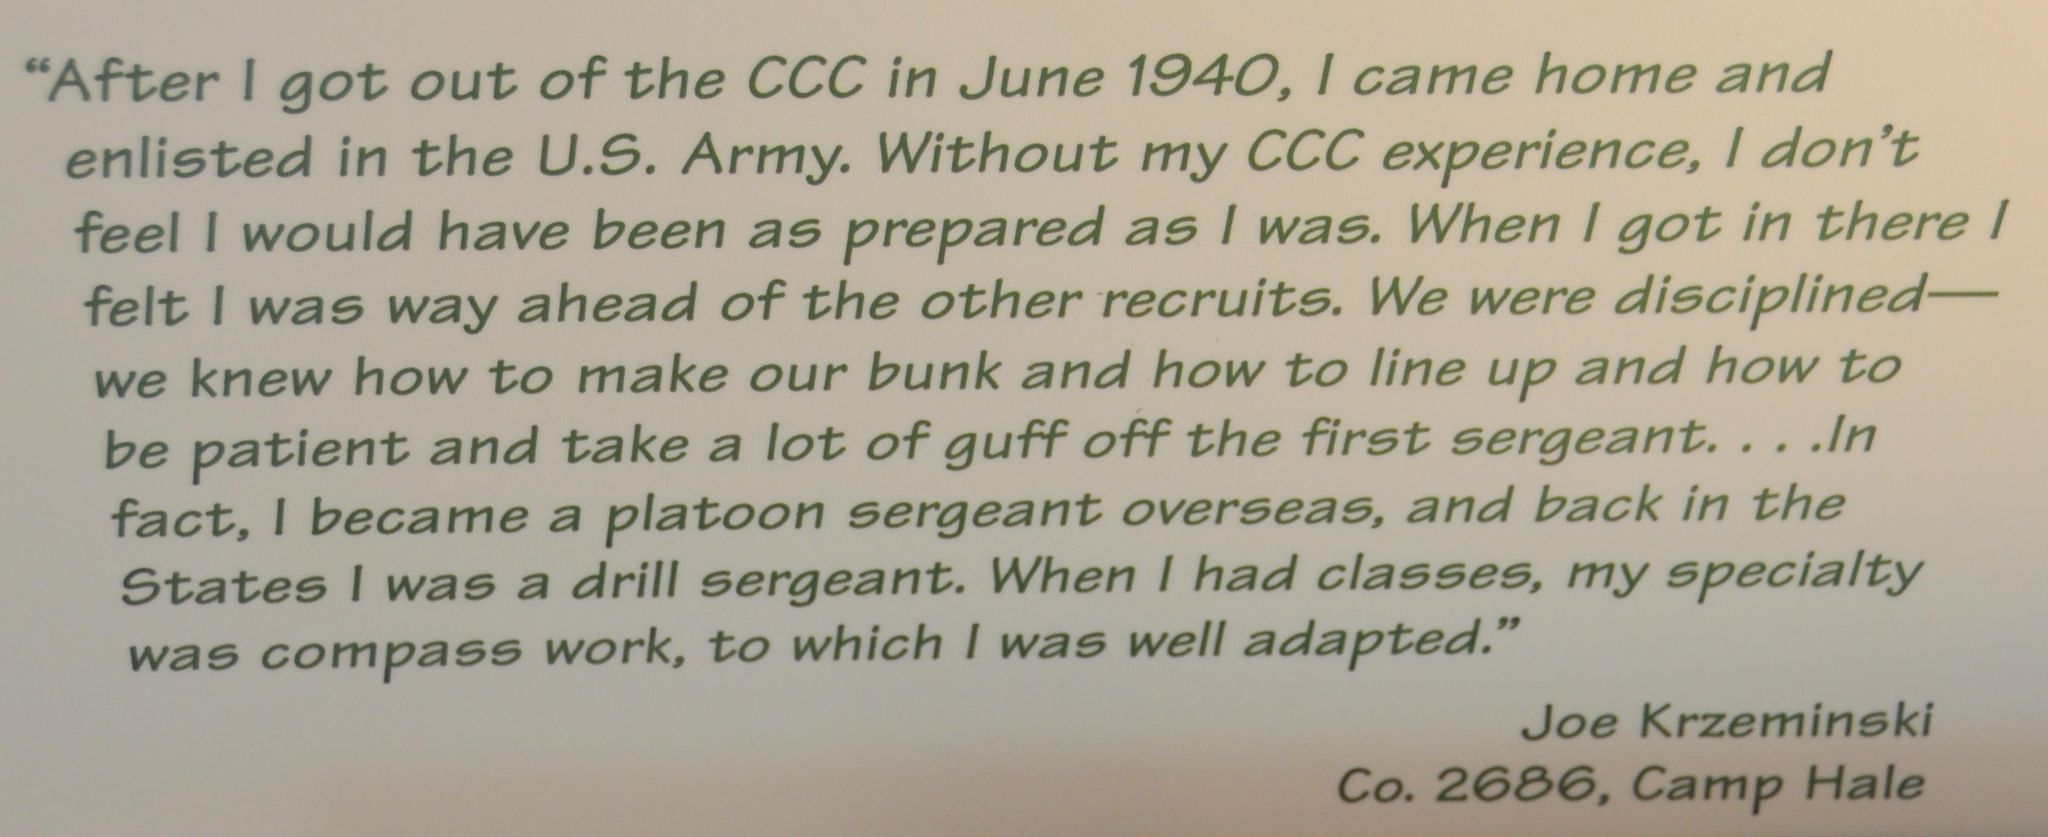 CCC Museum (What One Man Got from the Program), Roscommon,  - 2014-08-04